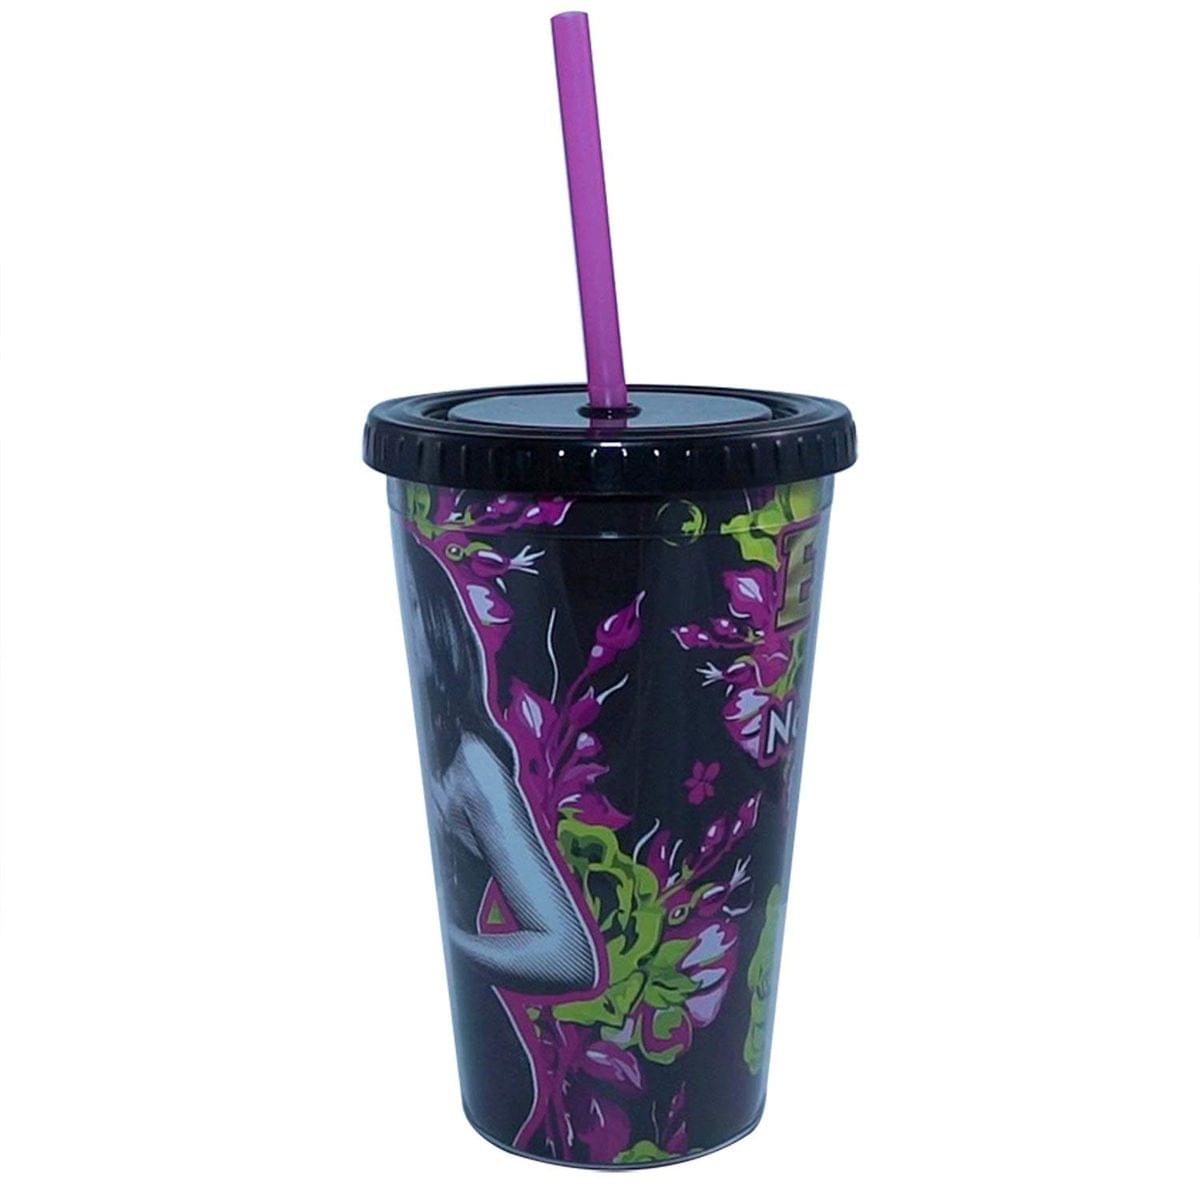 Empire Cookie "No Nookie" 16oz Carnival Cup w/ Straw & Lid